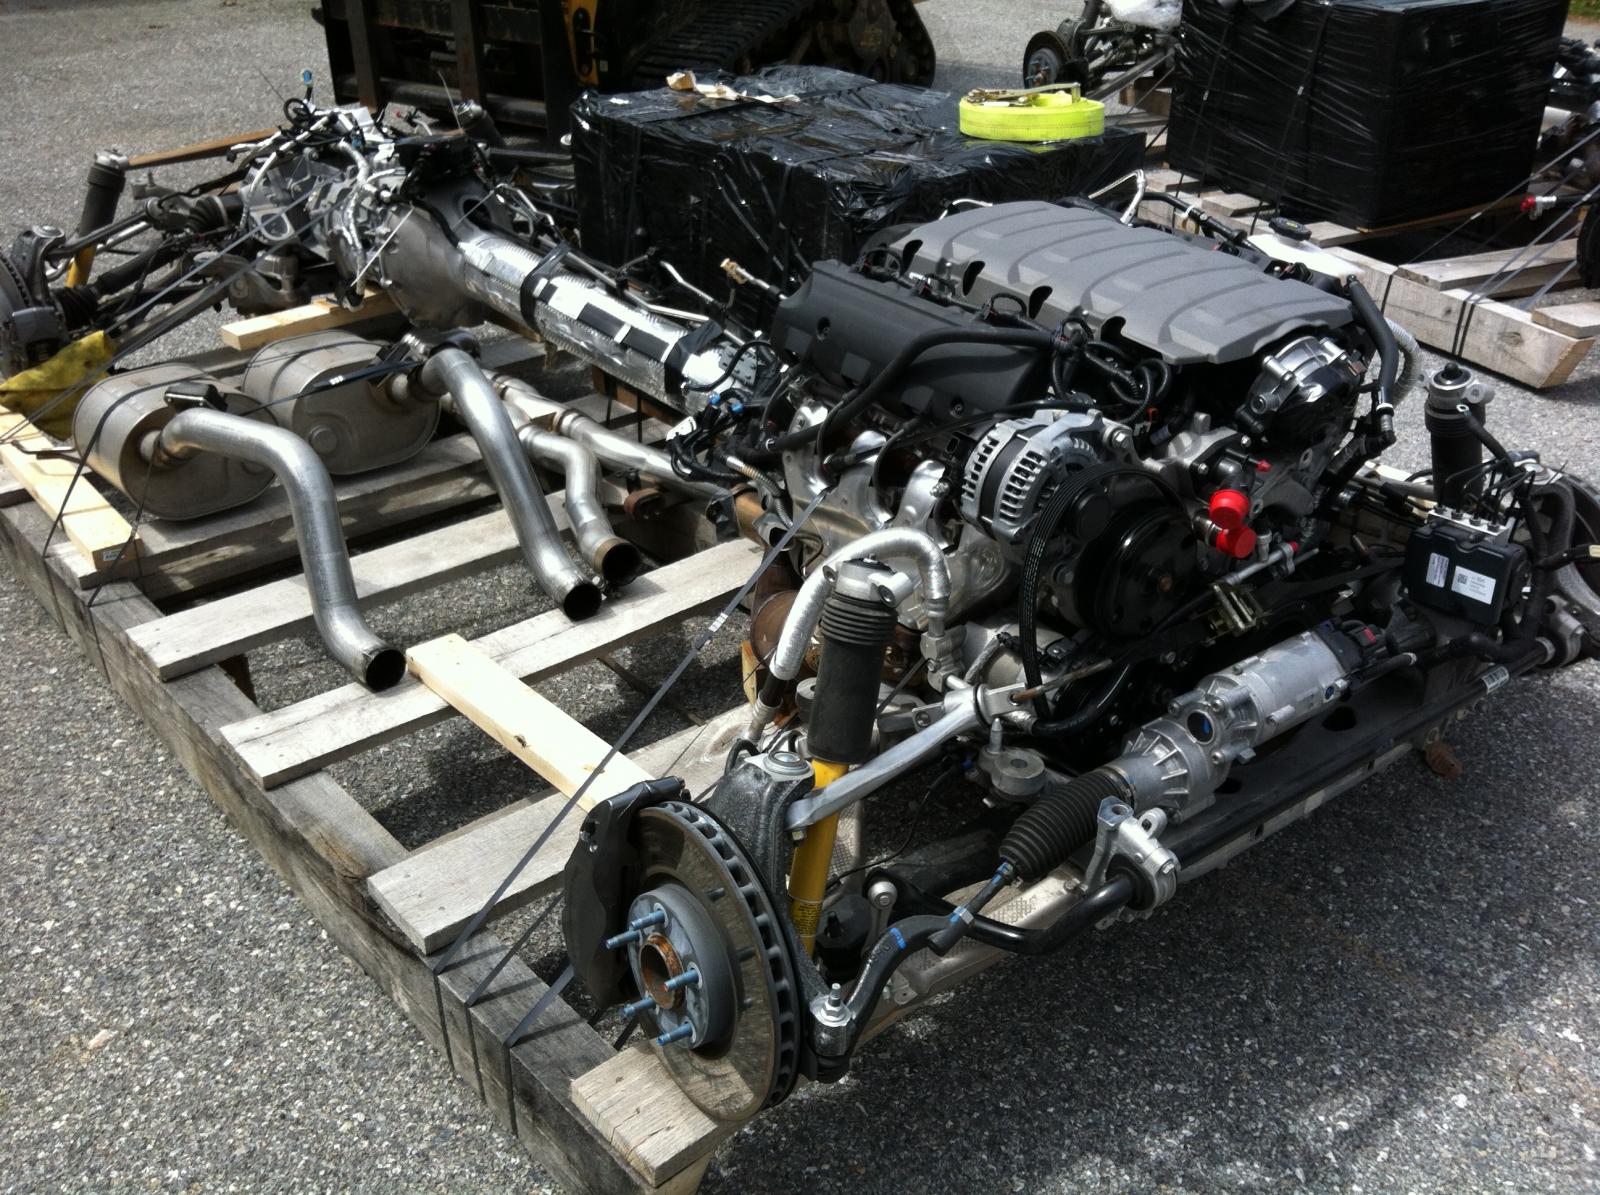 2014 C7 Corvette Complete "Rolling Chassis" with Driveline